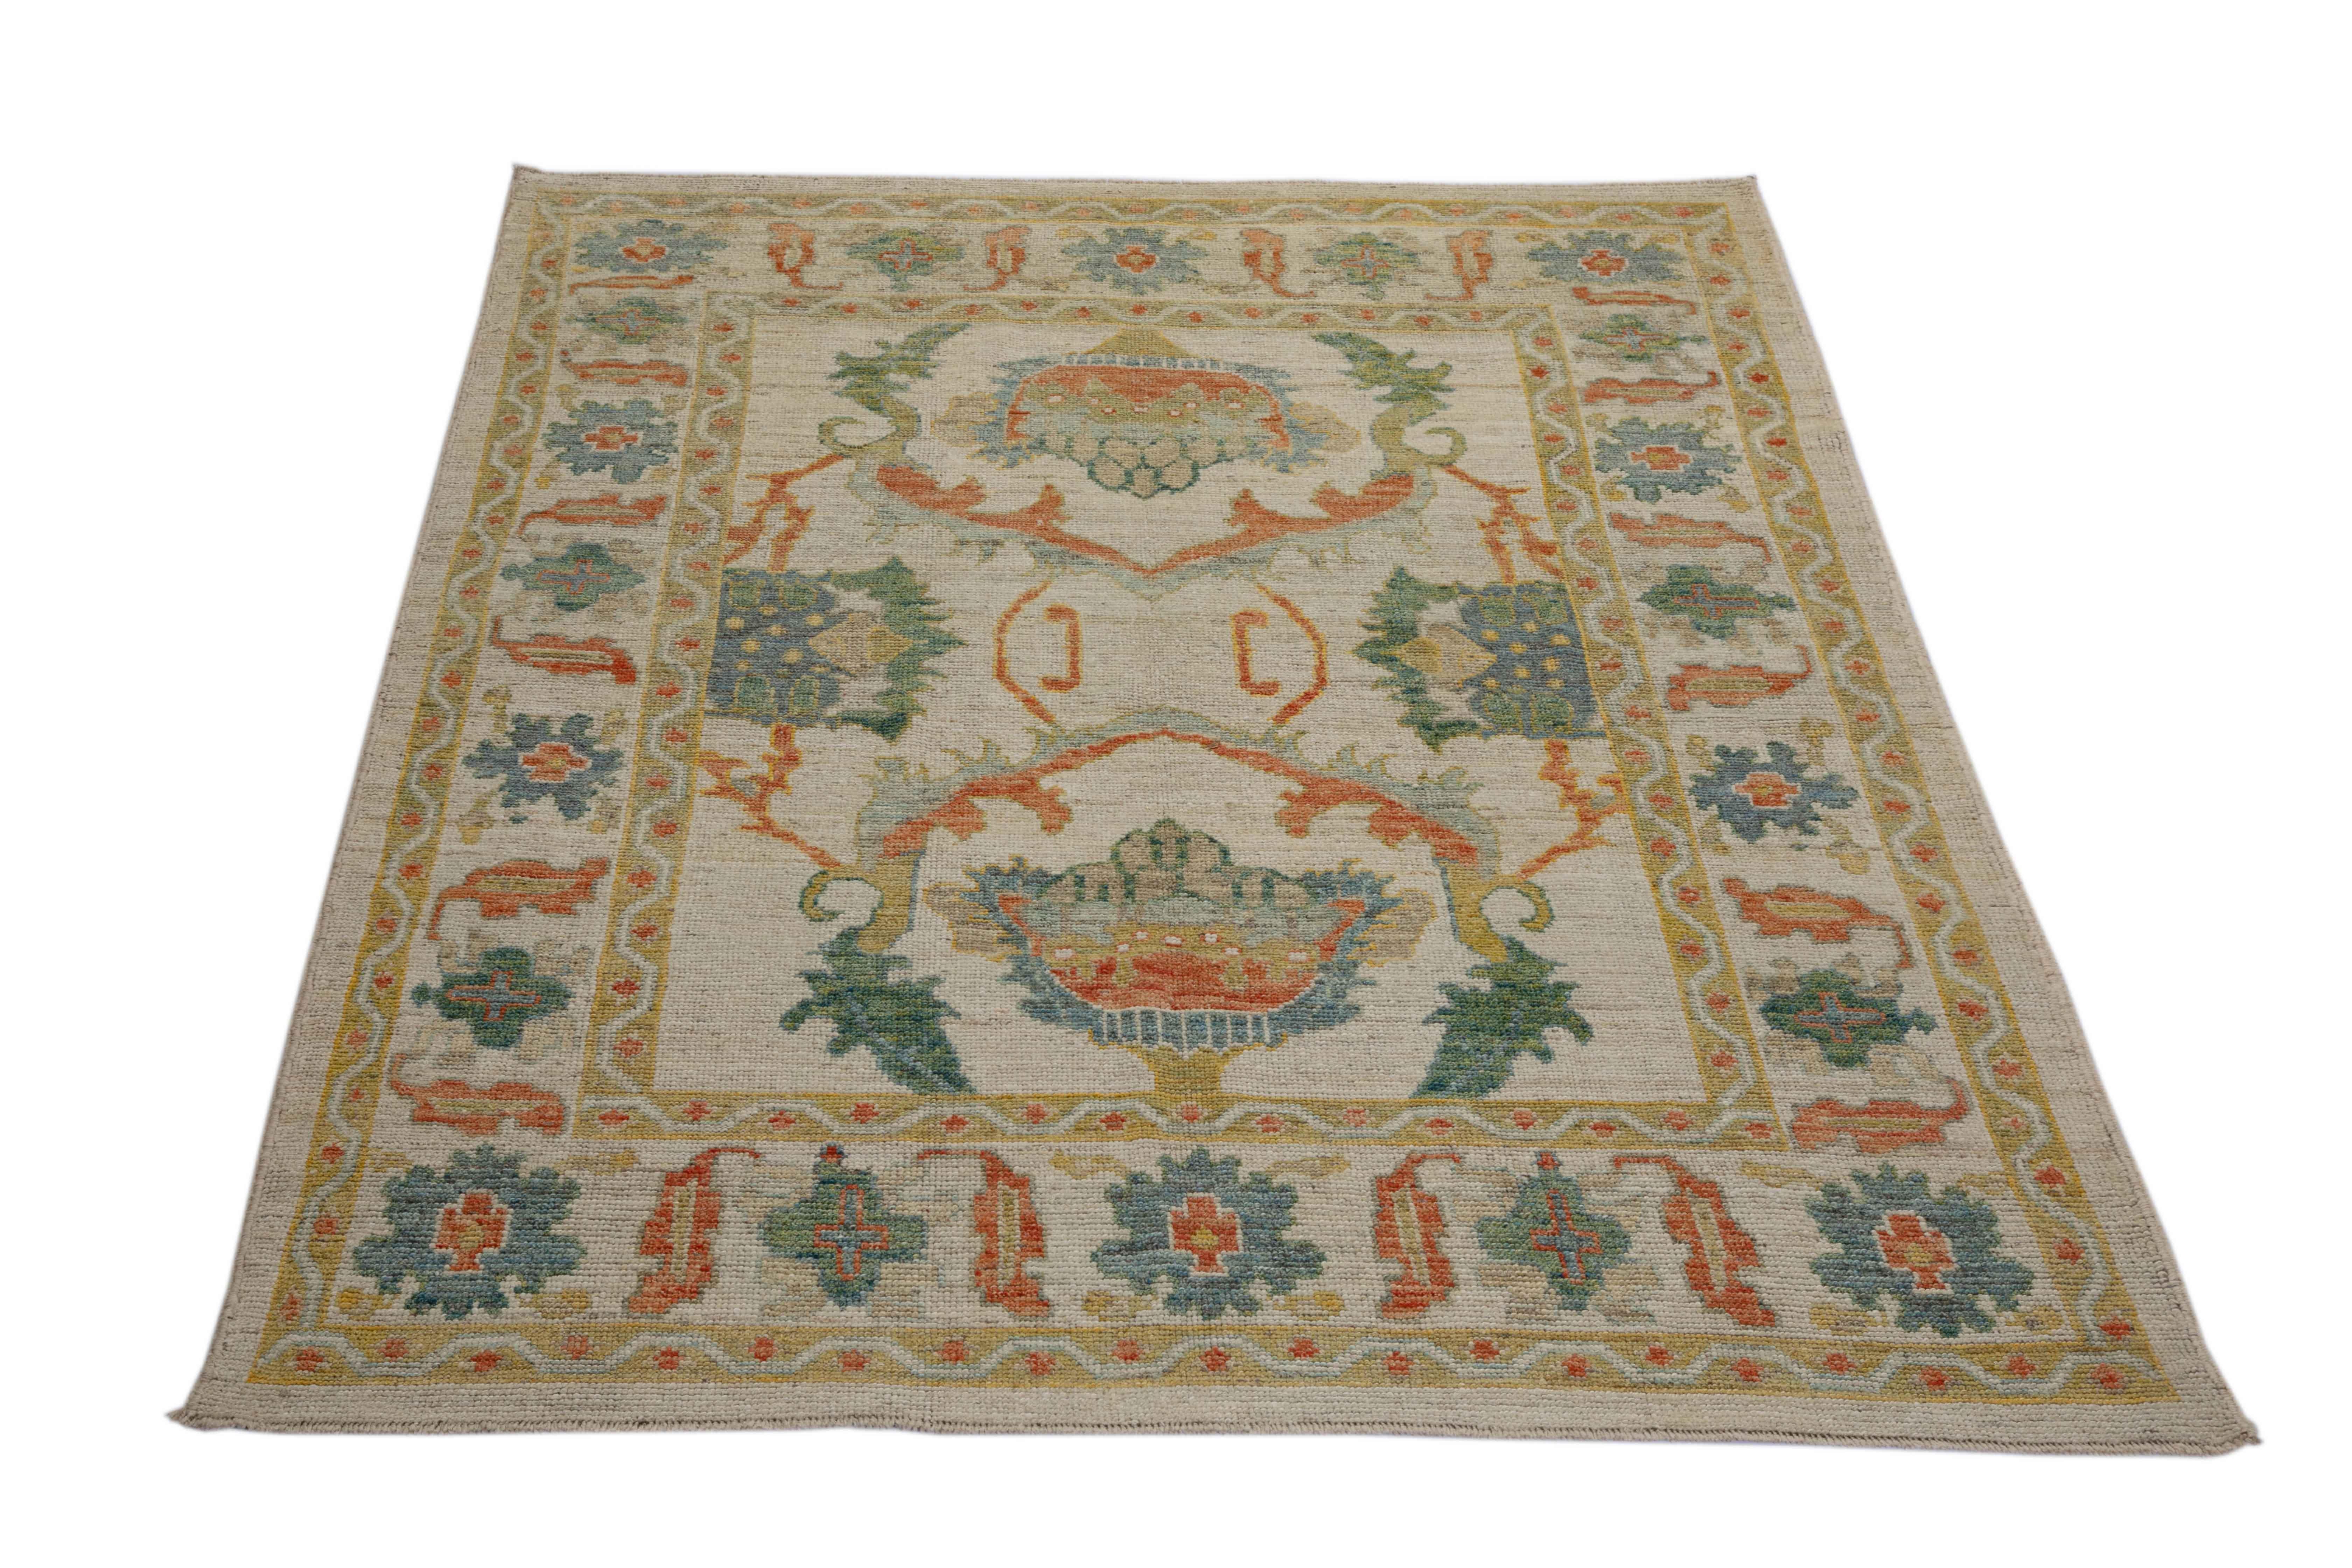 New Turkish rug made of handwoven sheep’s wool of the finest quality. It’s colored with organic vegetable dyes that are certified safe for humans and pets alike. It features a large, beige field with green and rust flower details allover associated